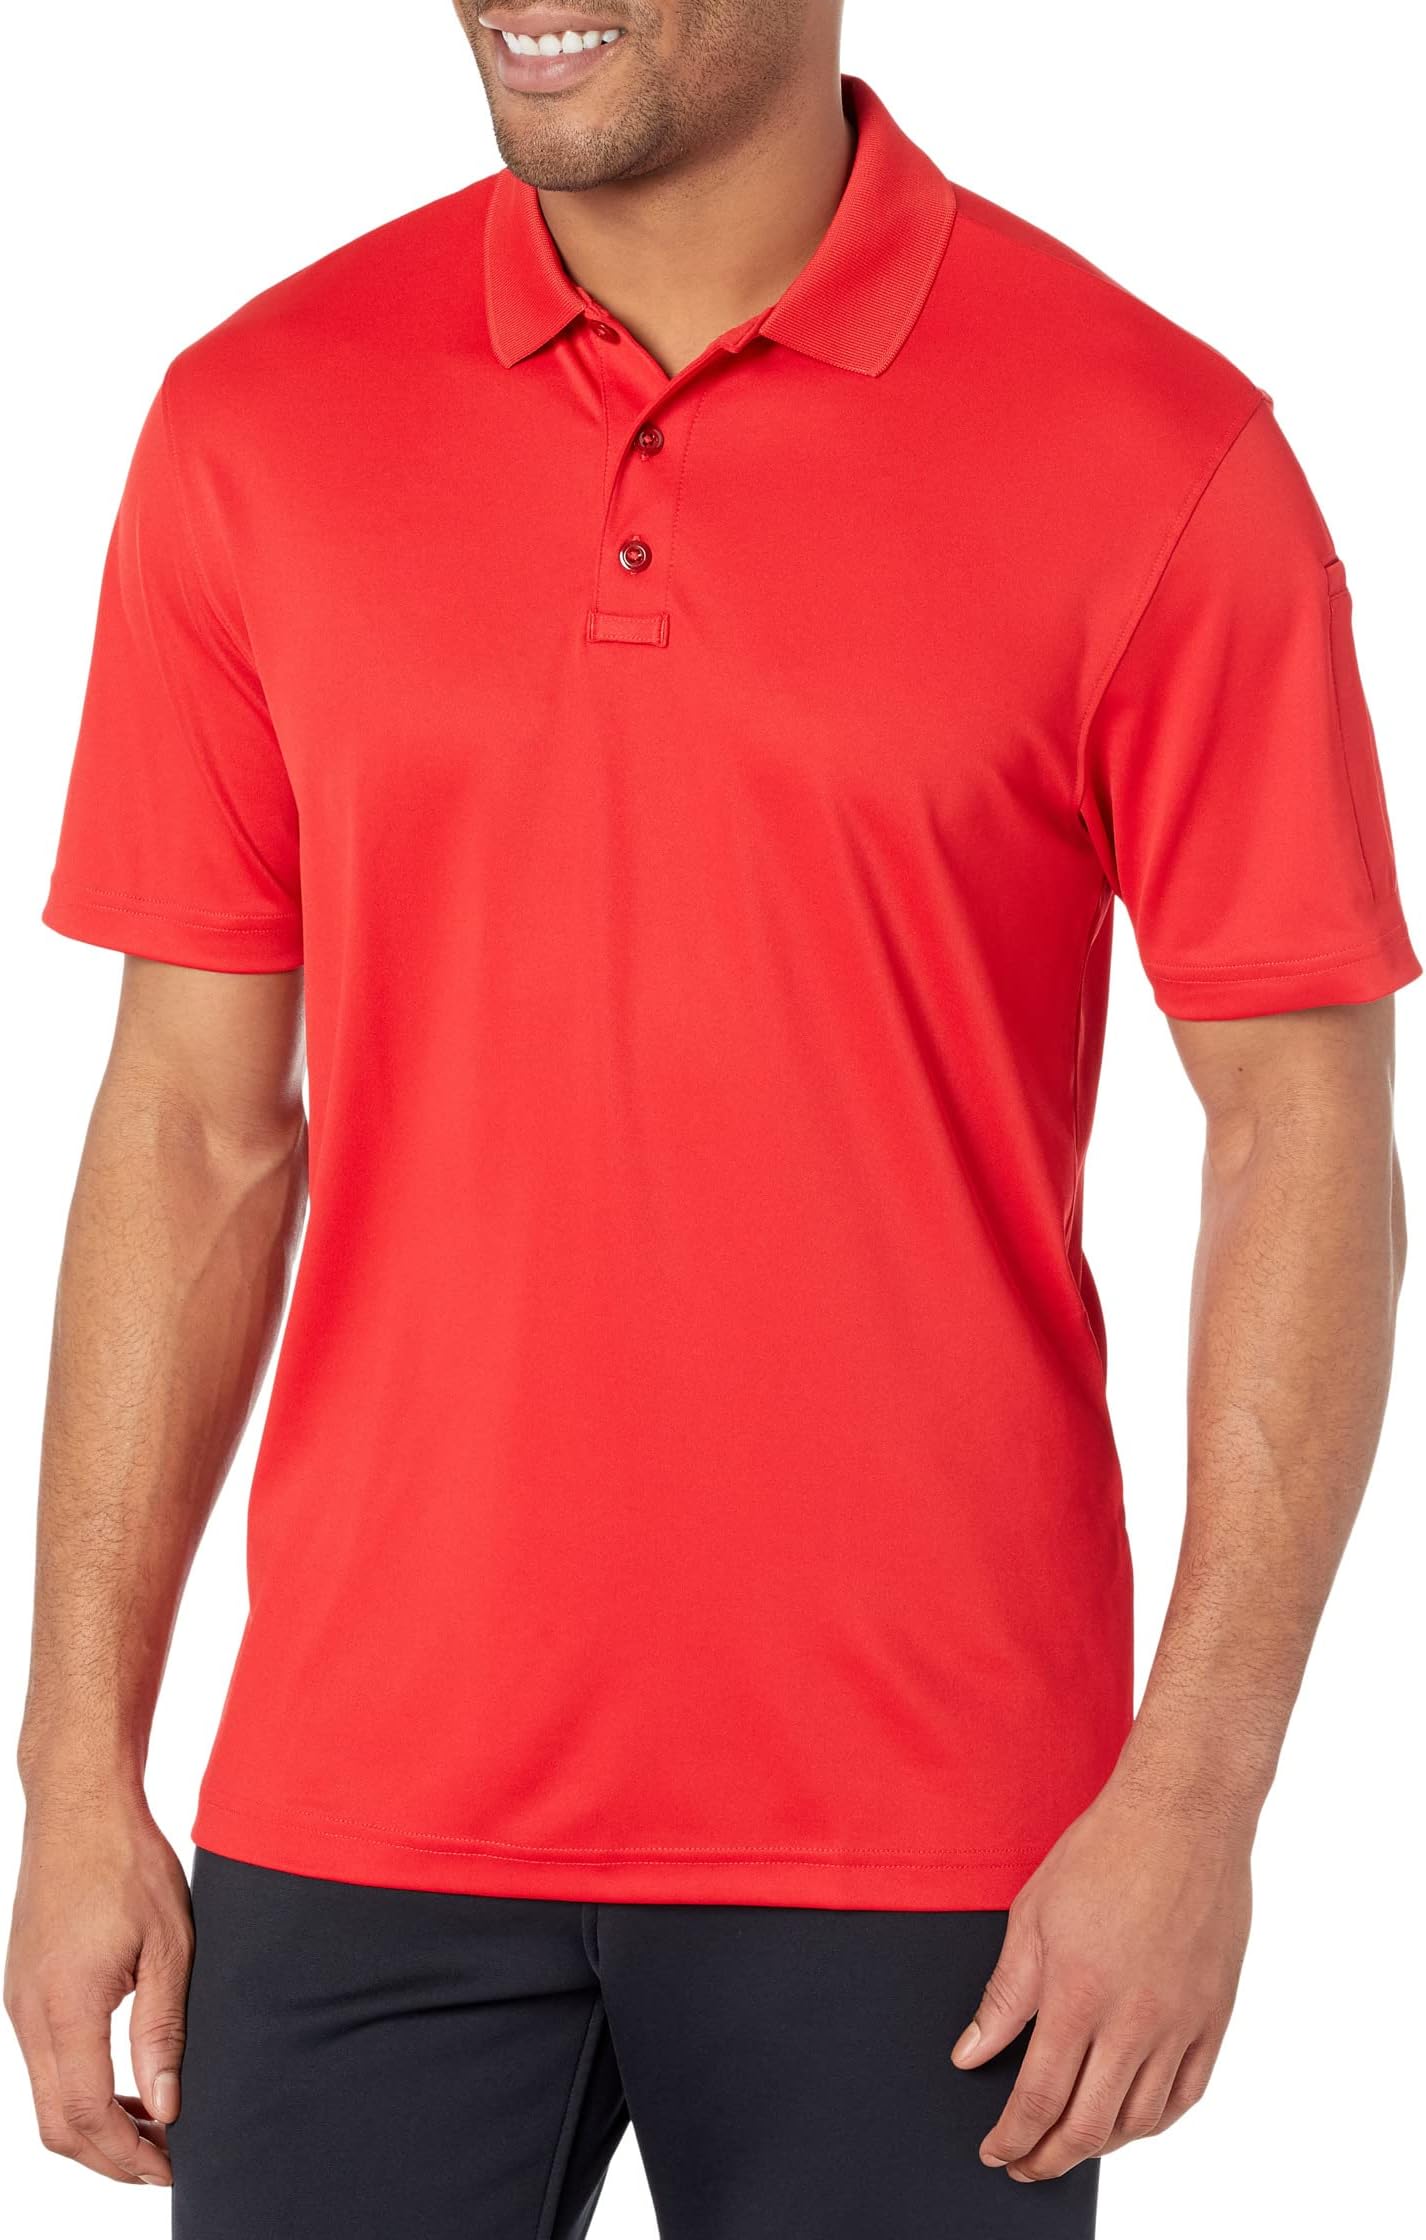 lynch scott red seas under red skies Tac Performance Polo 2.0 Under Armour, цвет Red/Red